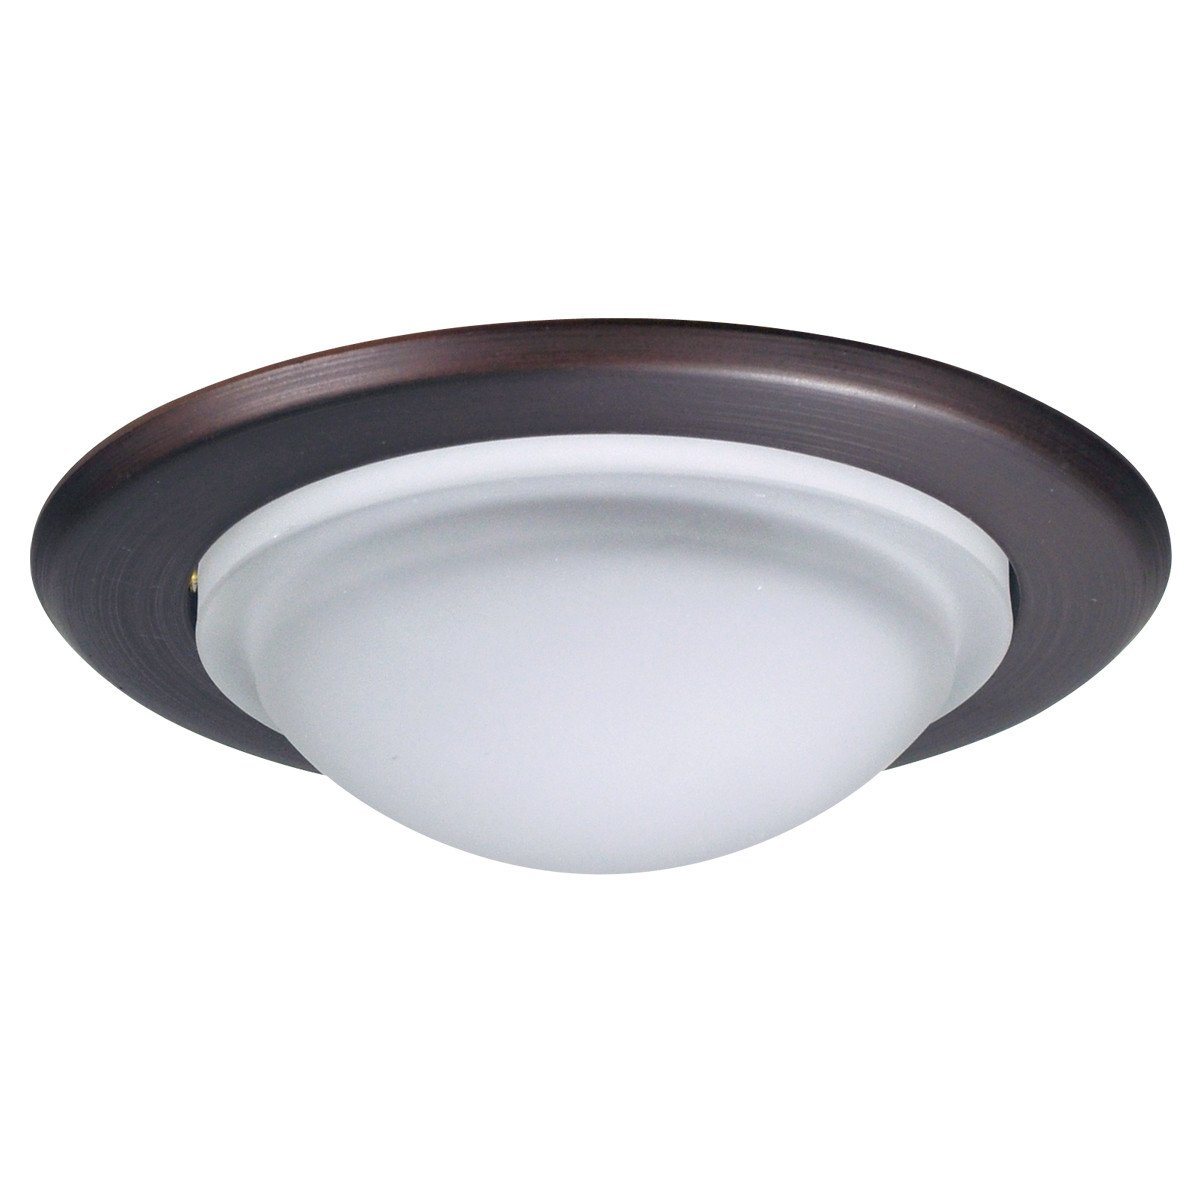 Frosted Dome Lens w/ Specular Clear Reflector, Black Trim Recessed Nora Lighting 